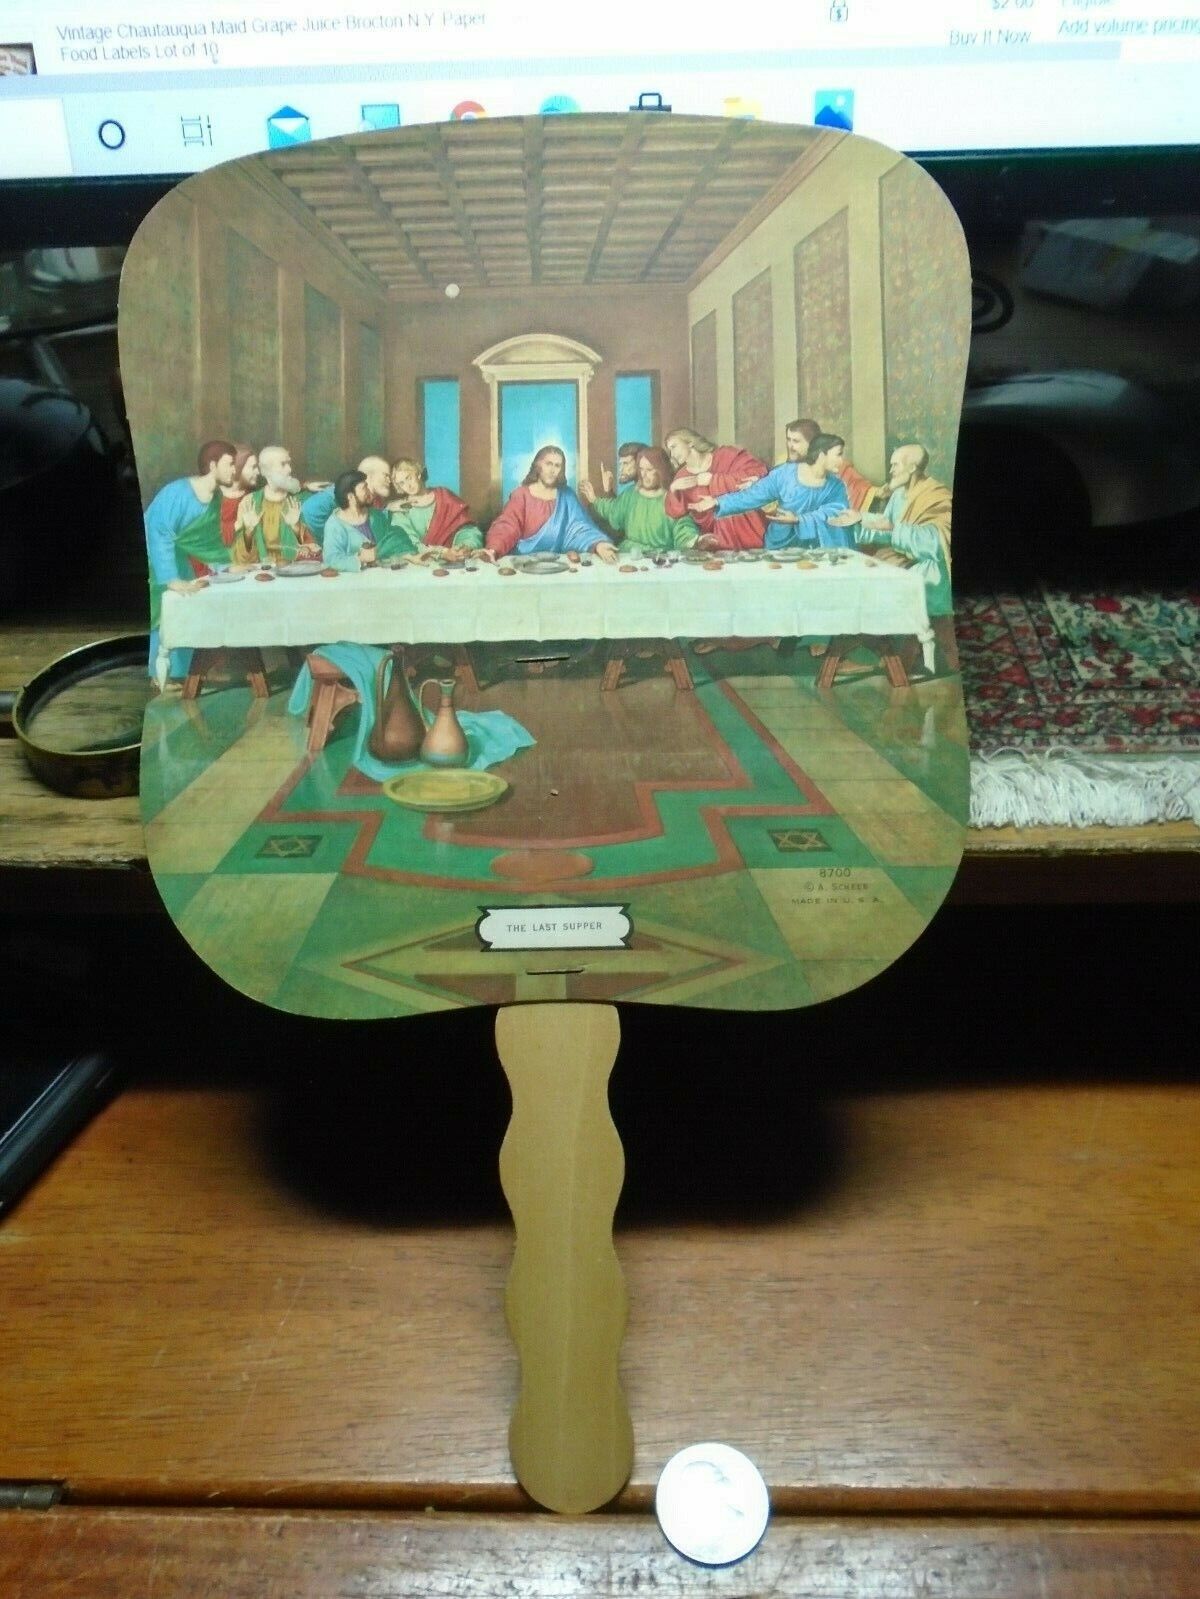 VINTAGE  ADVERTISING FAN - THE LAST SUPPER - GROVE SUPPLY CHINA GROVE N.C. 